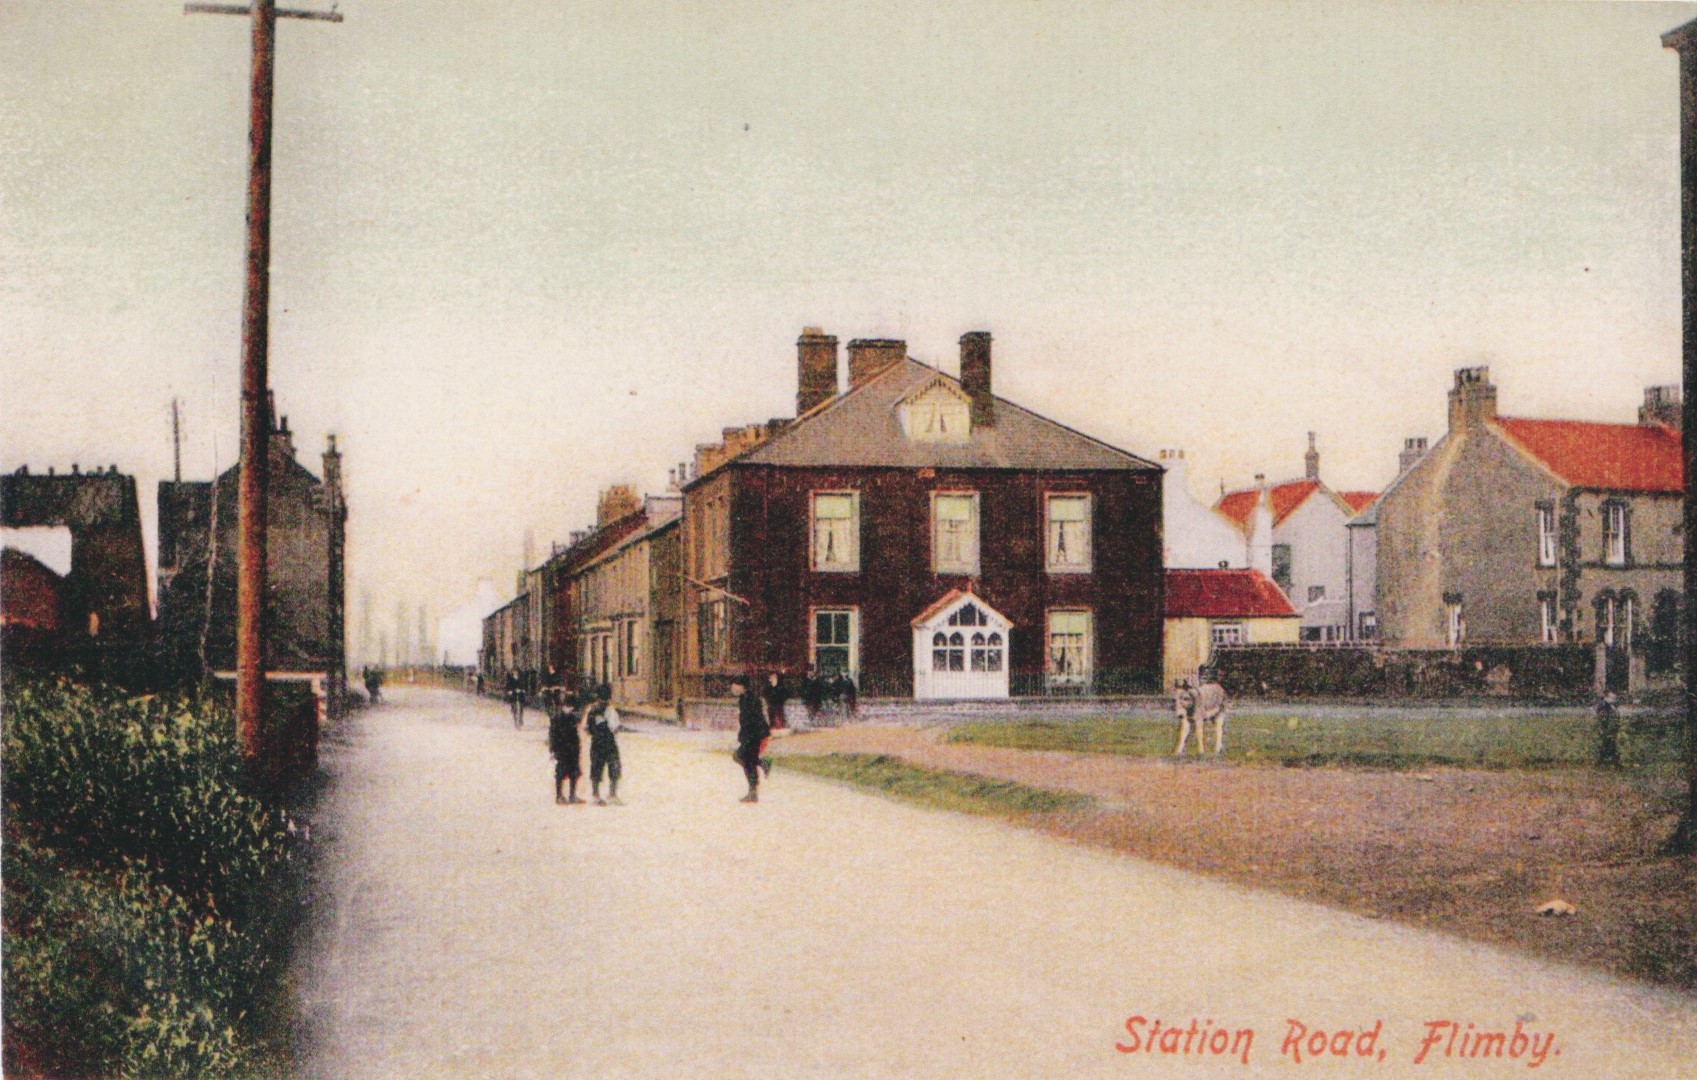 Flimby Station Road with donkey colourised jpg